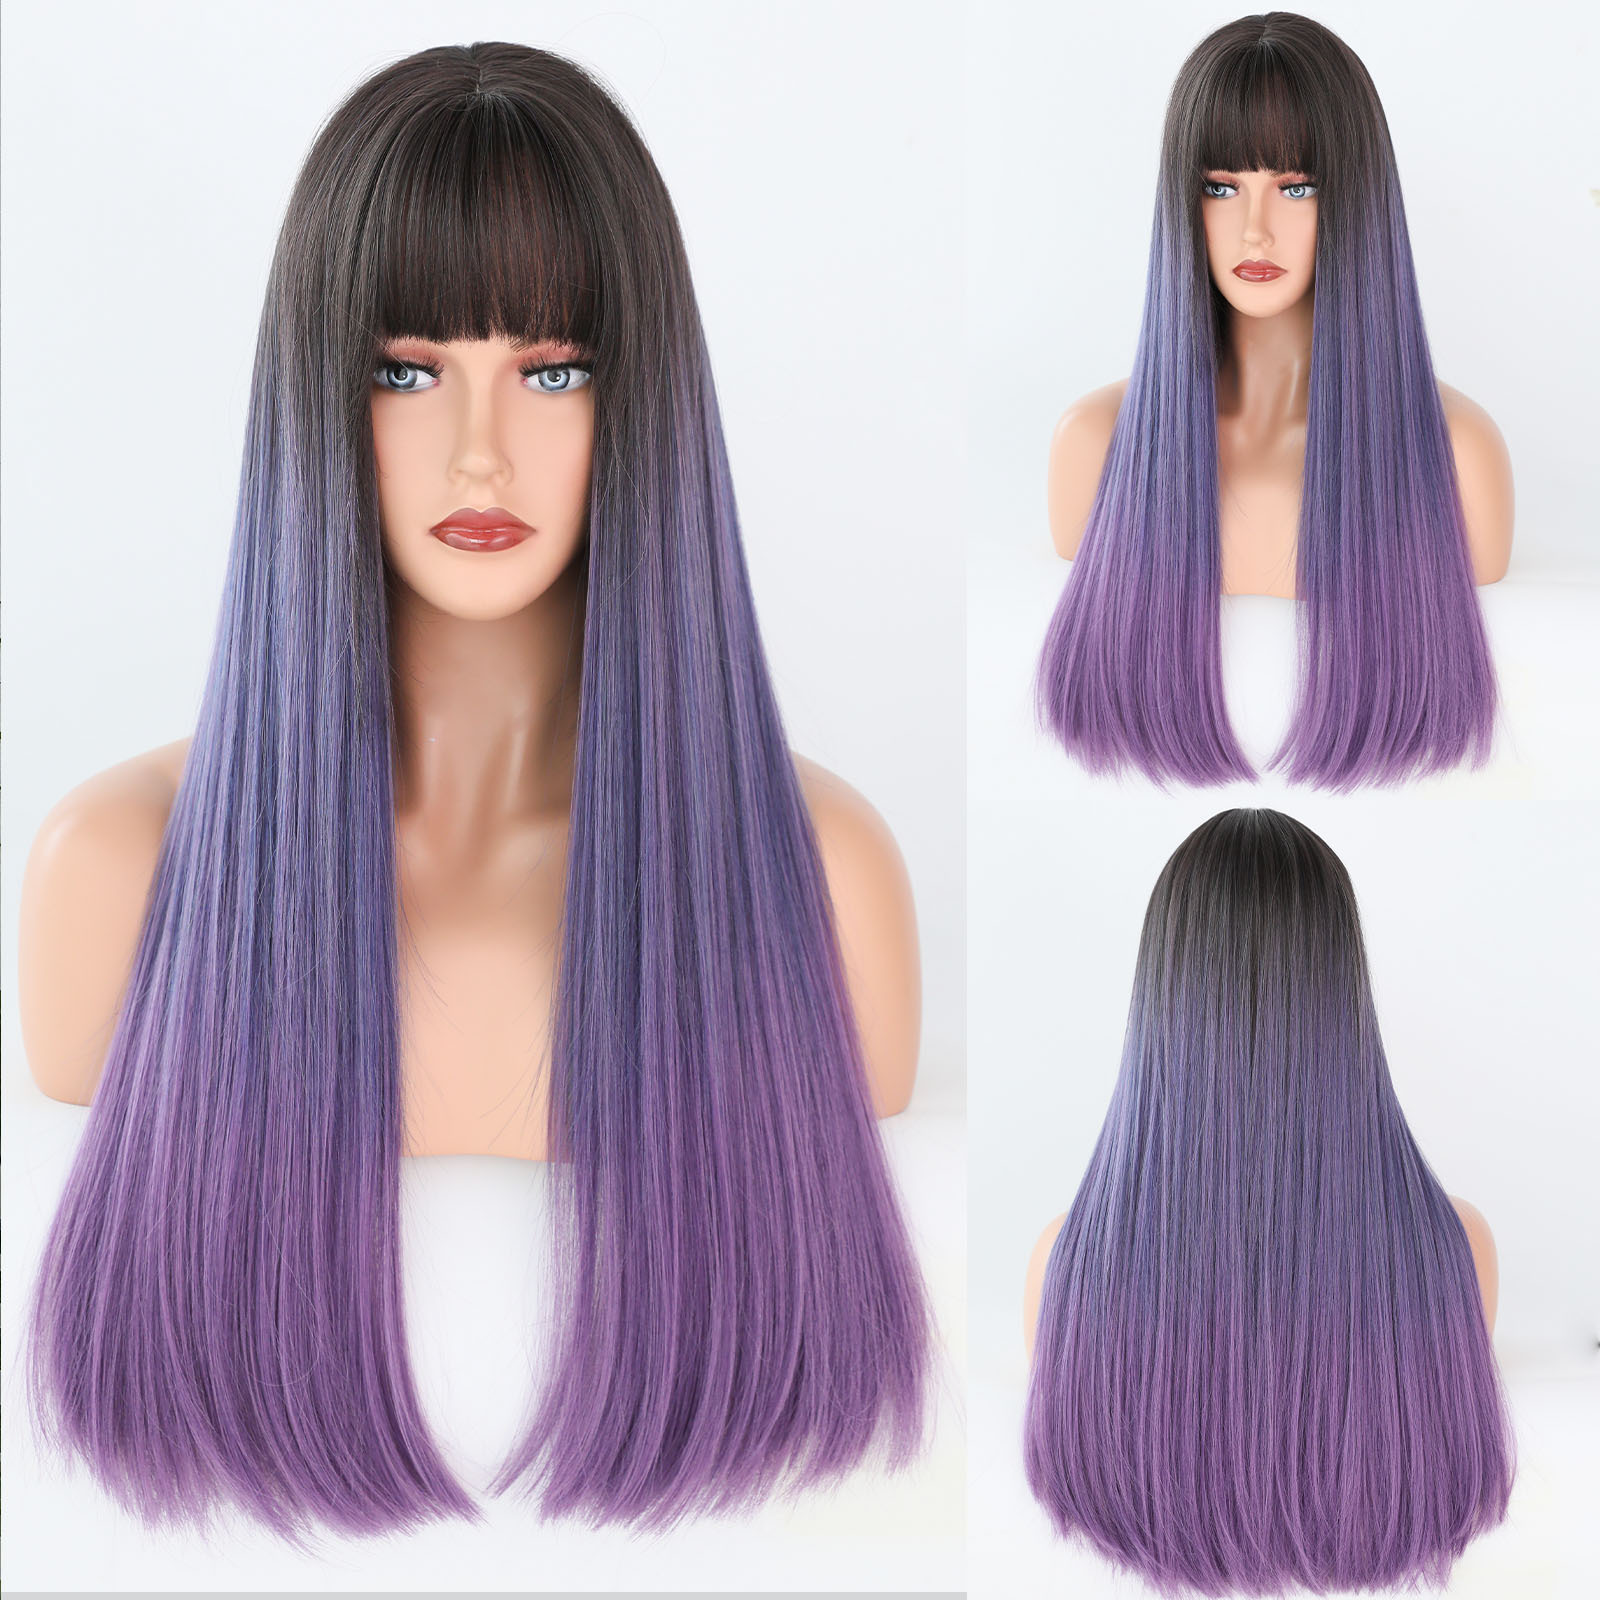 Fashionable synthetic wig from Yinraohair, in Barbie brown purple color, with long straight hair and bangs, ready to go